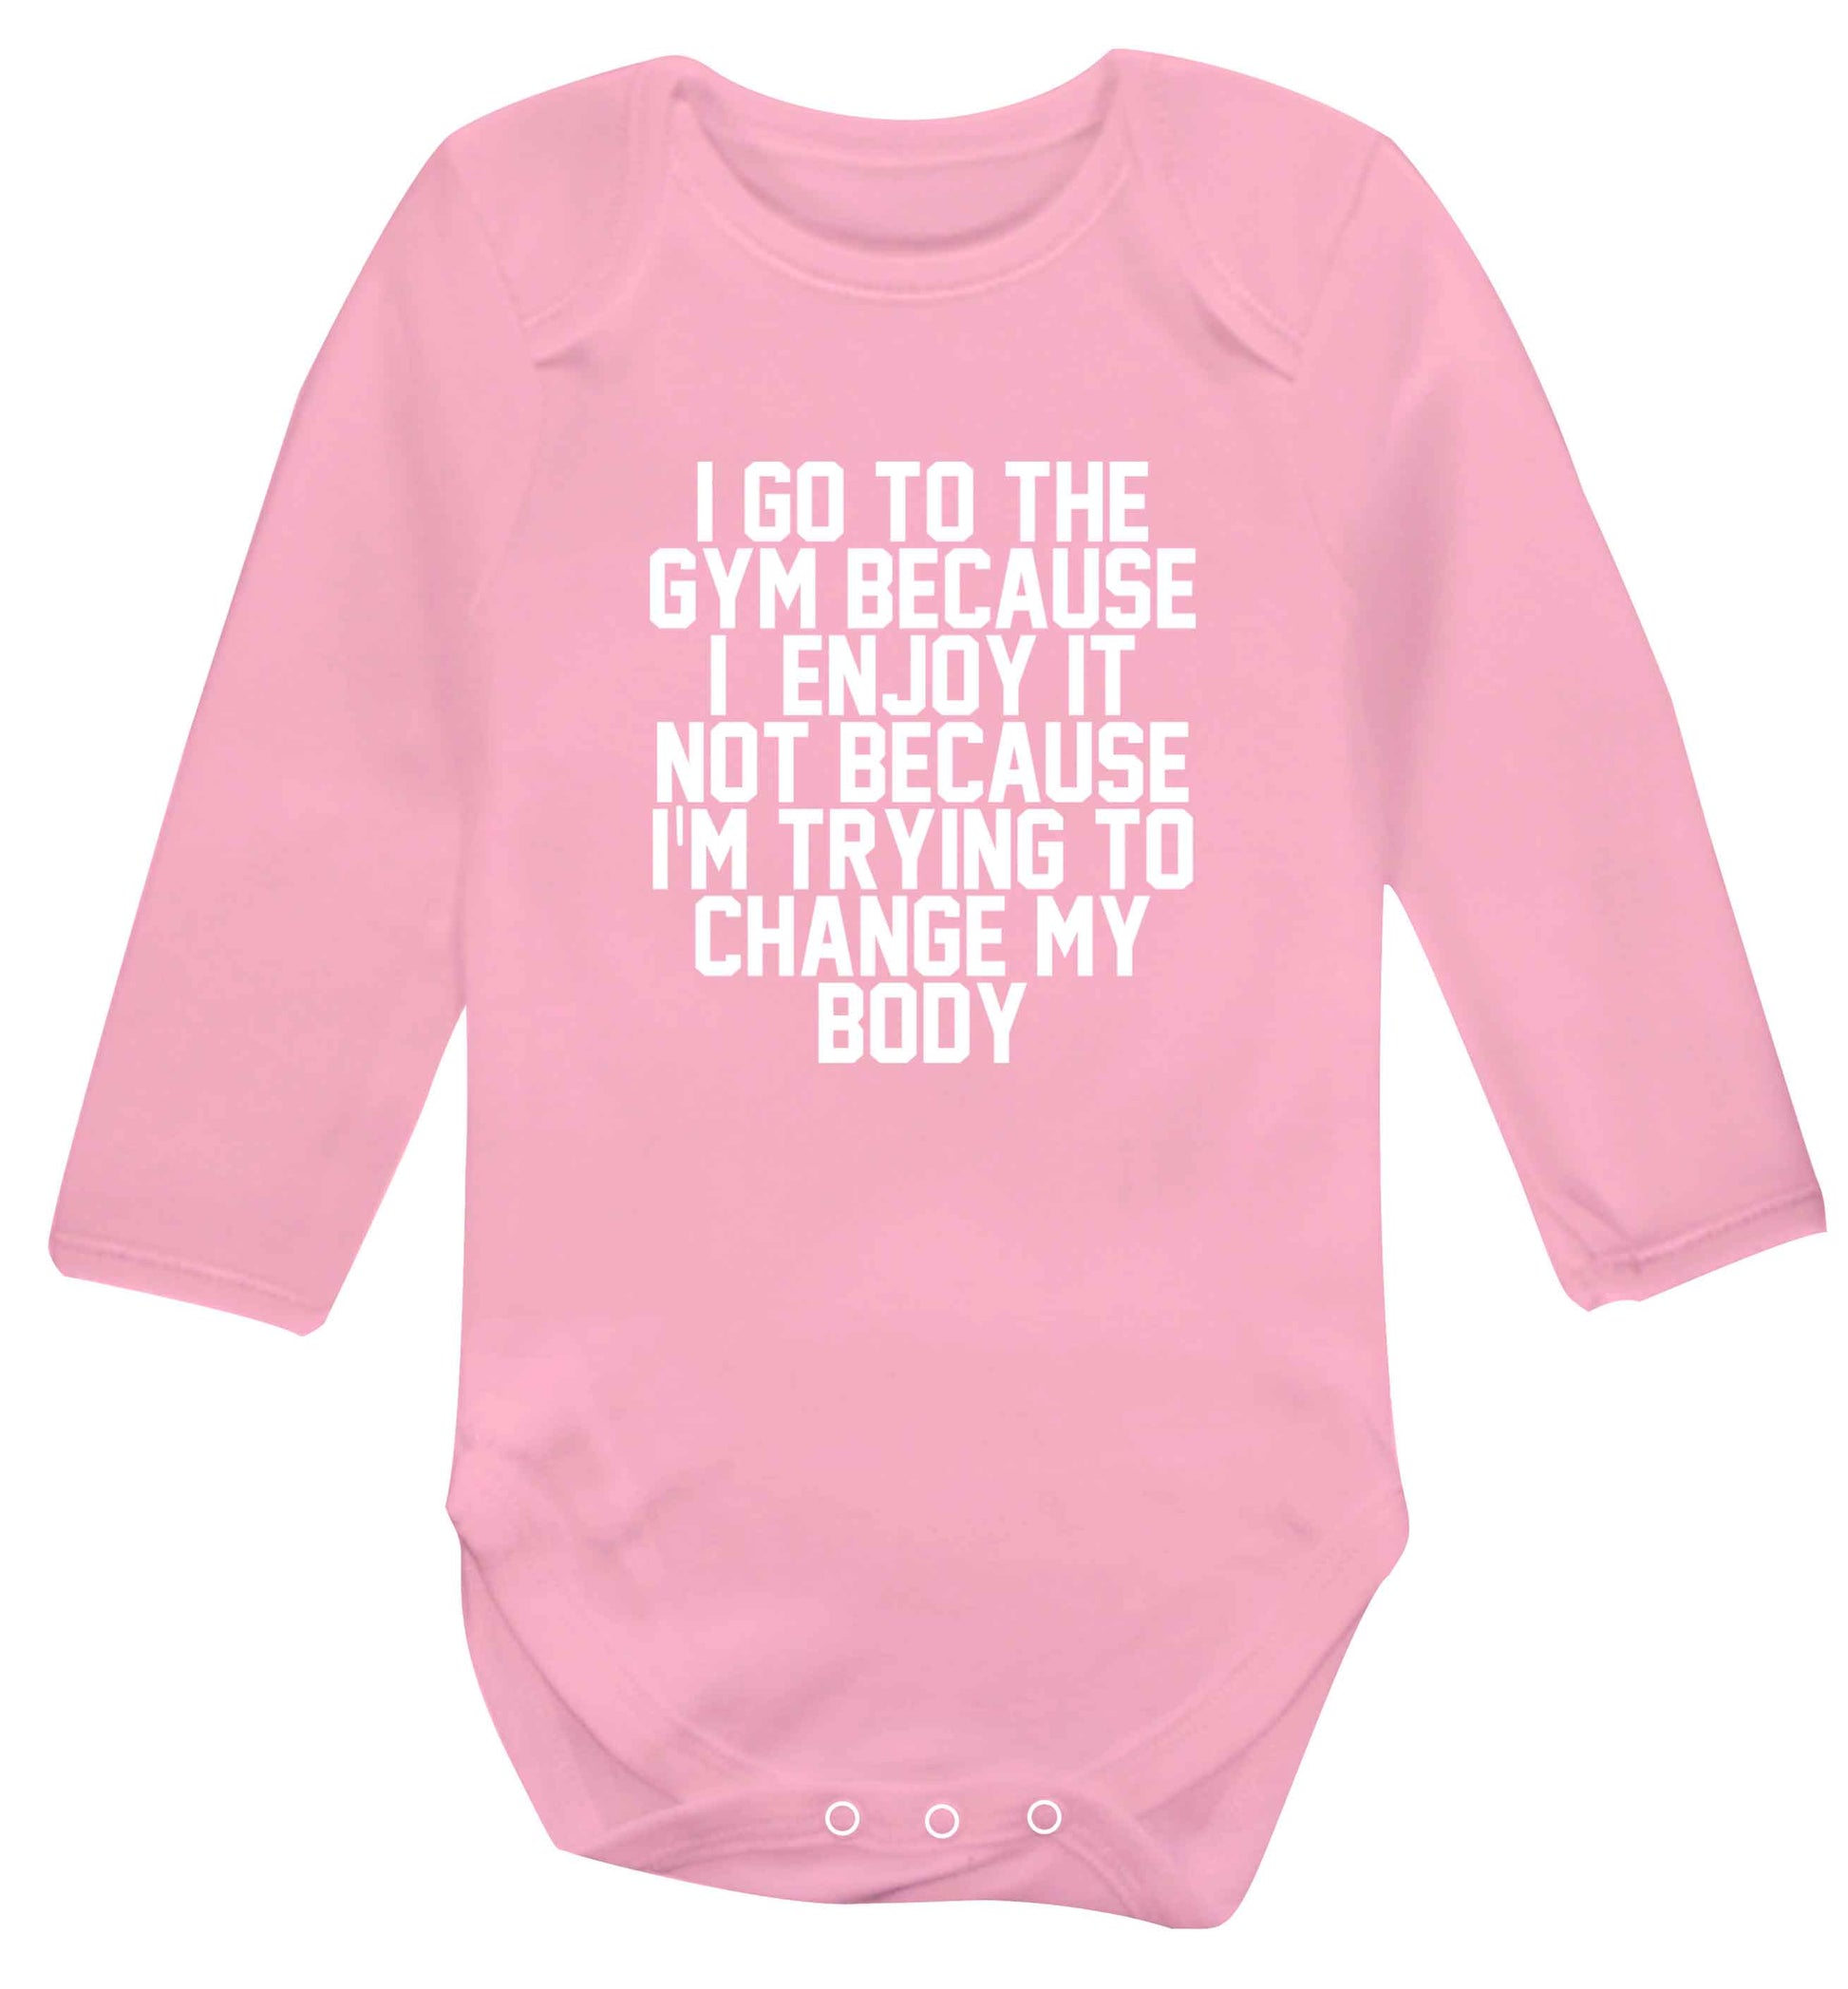 I go to the gym because I enjoy it not because I'm trying to change my body baby vest long sleeved pale pink 6-12 months